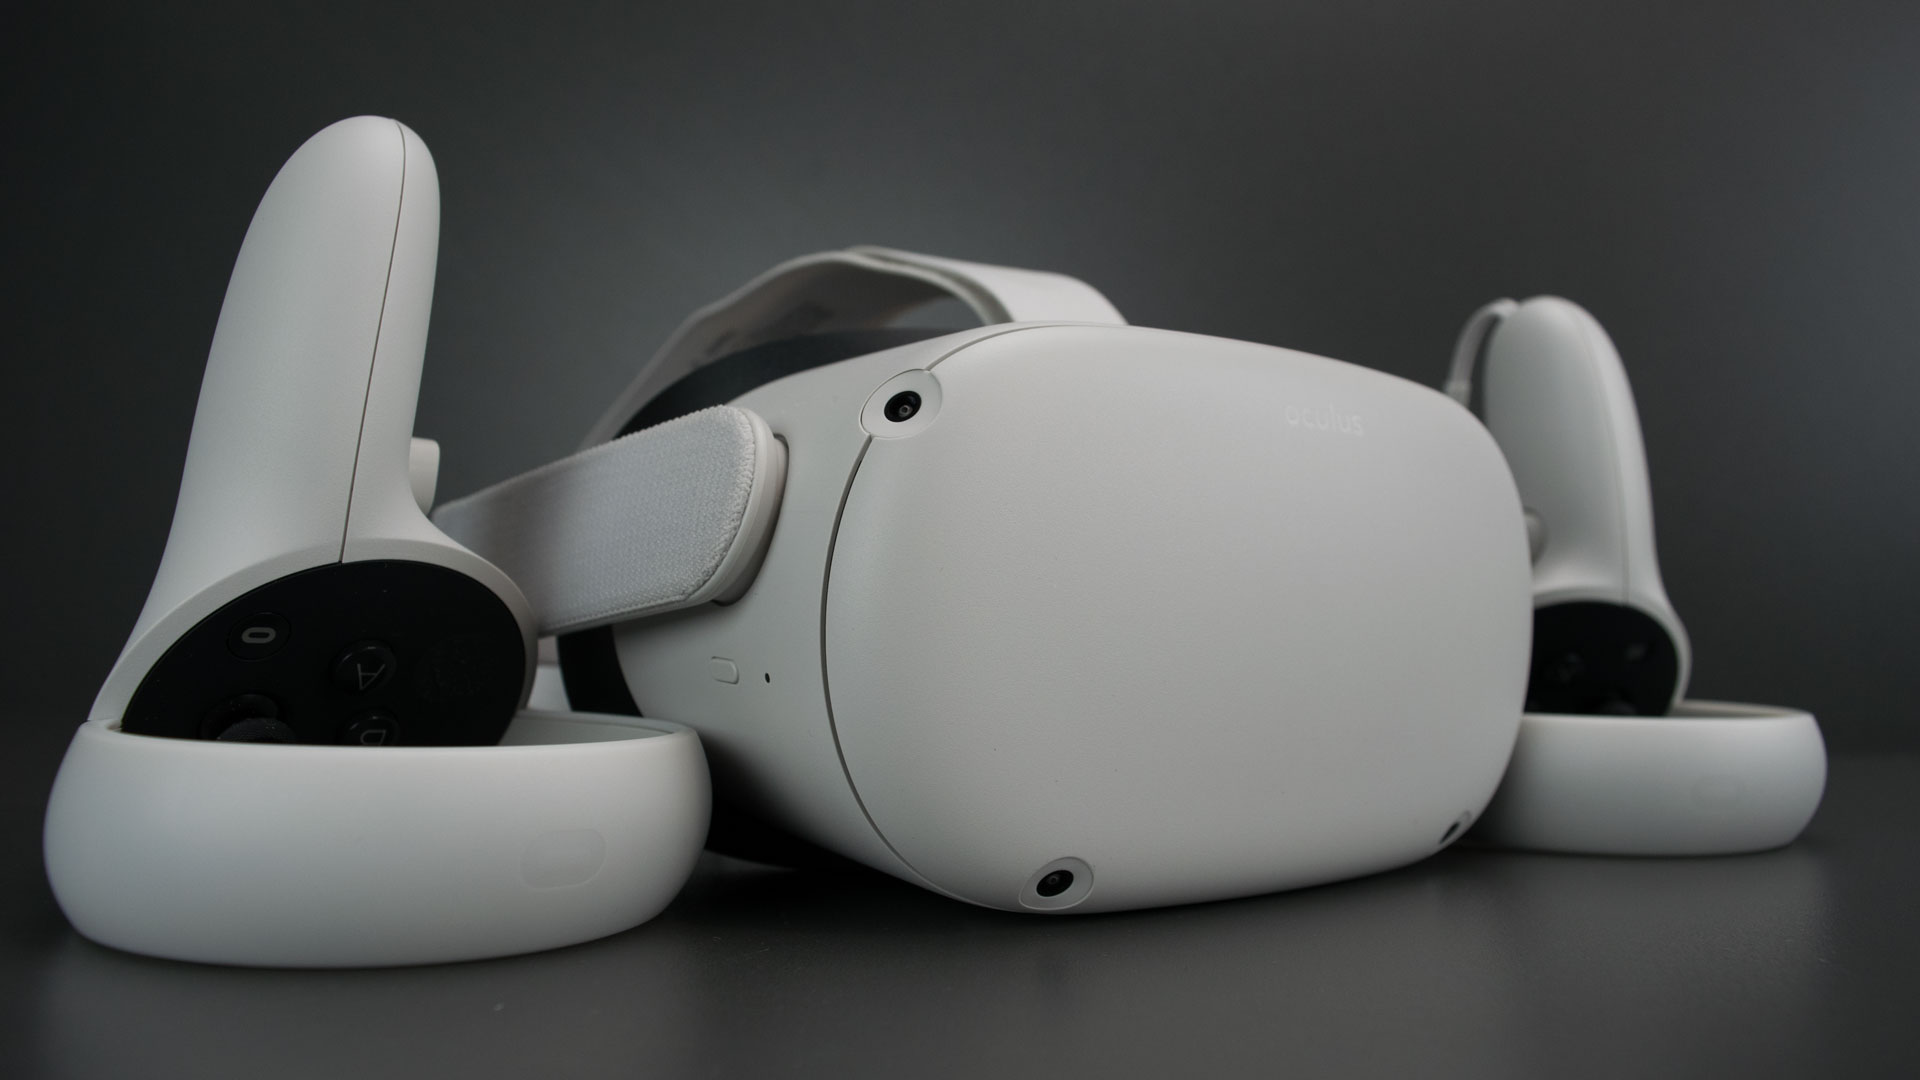 Oculus to Discontinue the Rift S, Quit PC-Only VR Headsets | Tom's Hardware